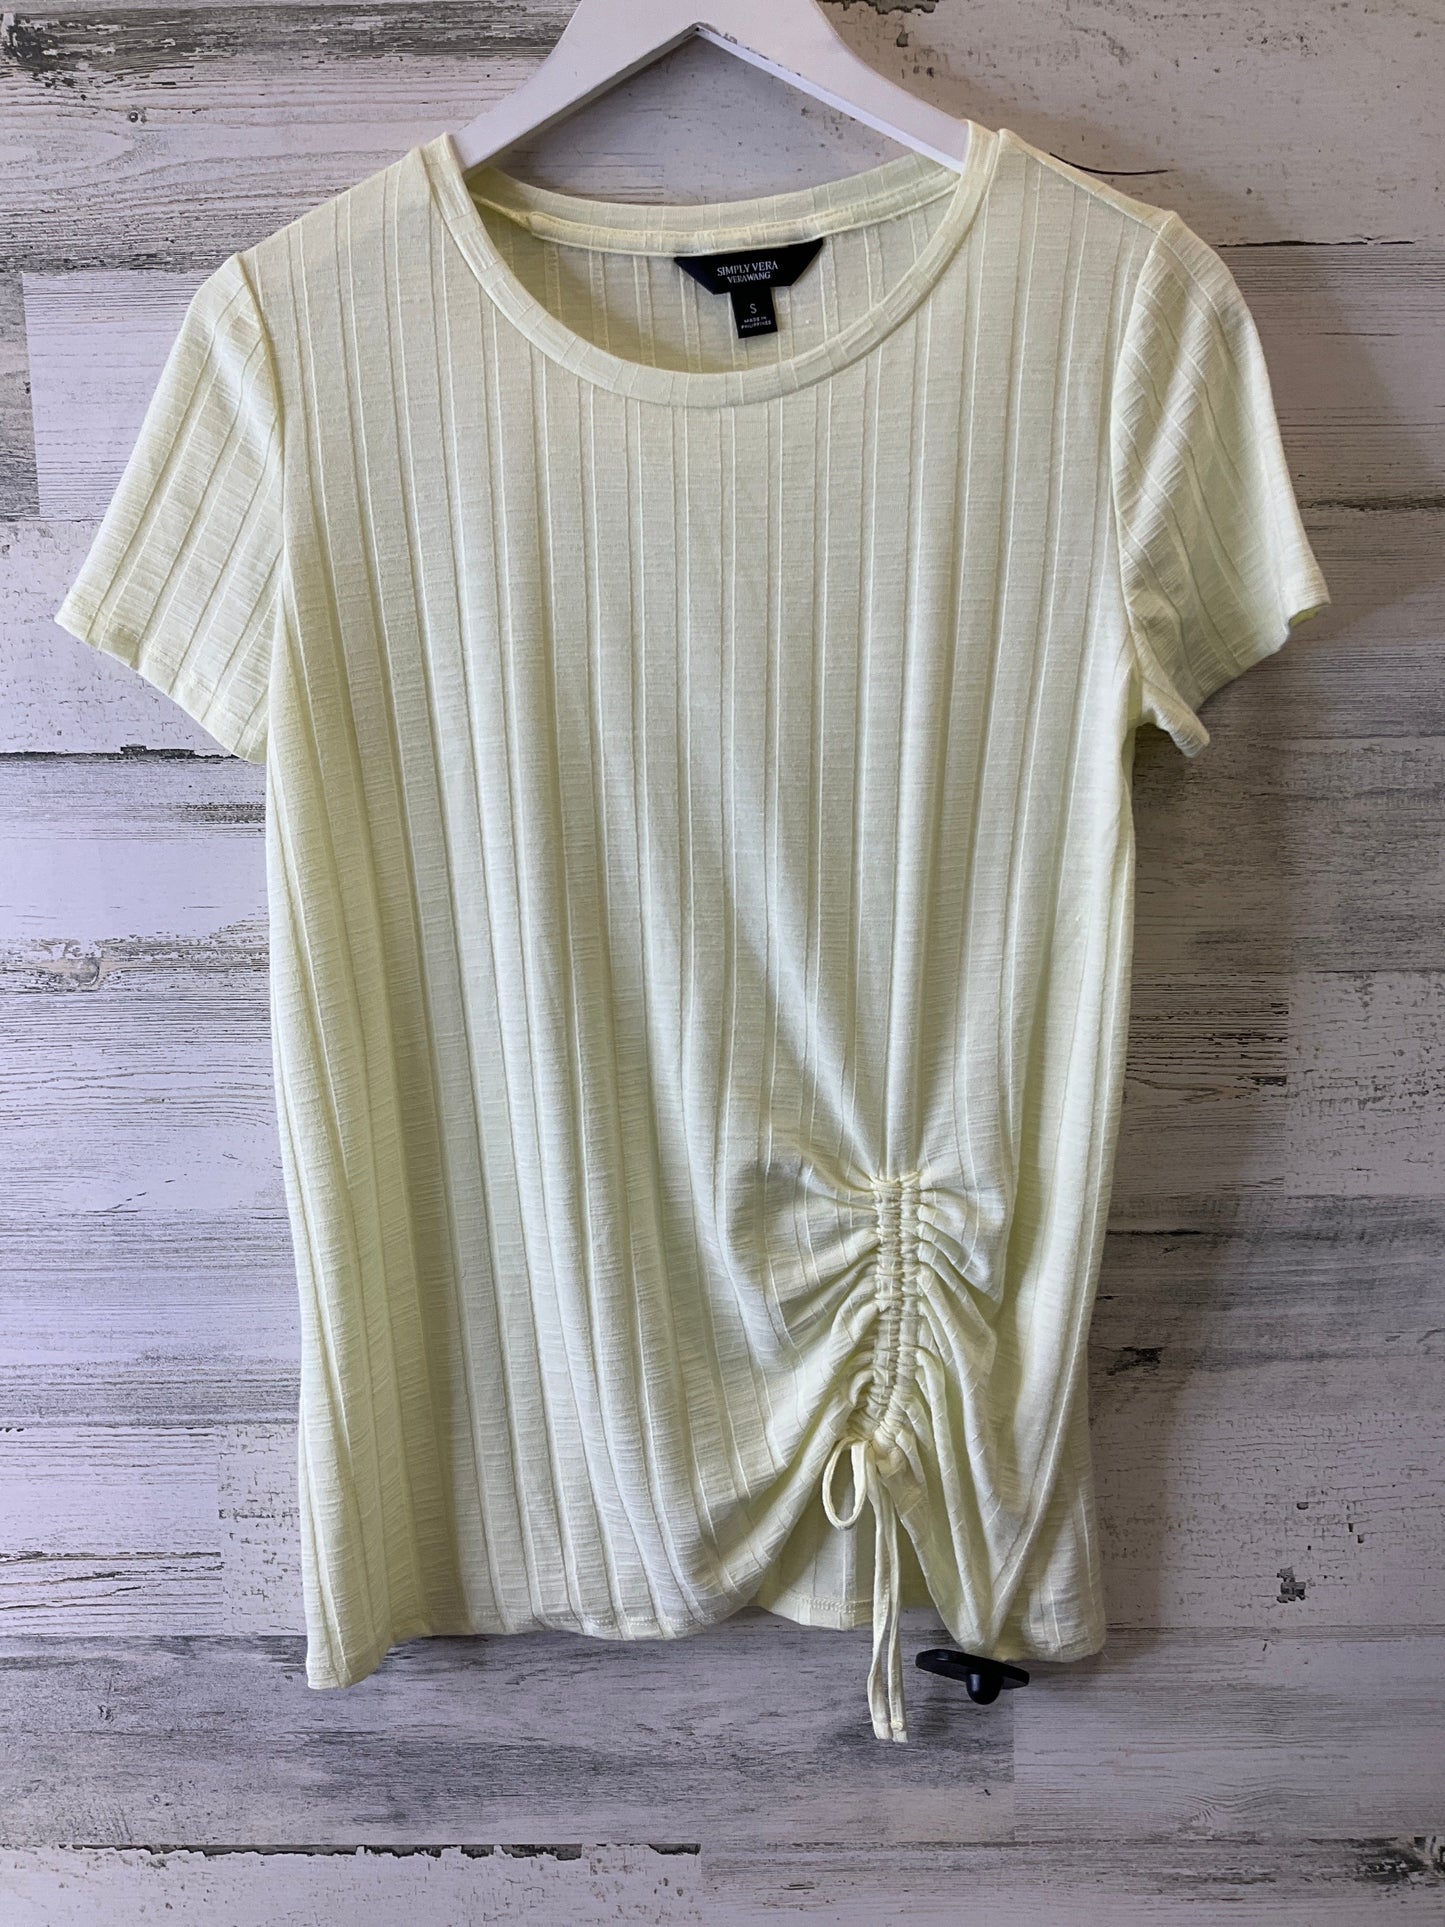 Yellow Top Short Sleeve Simply Vera, Size S